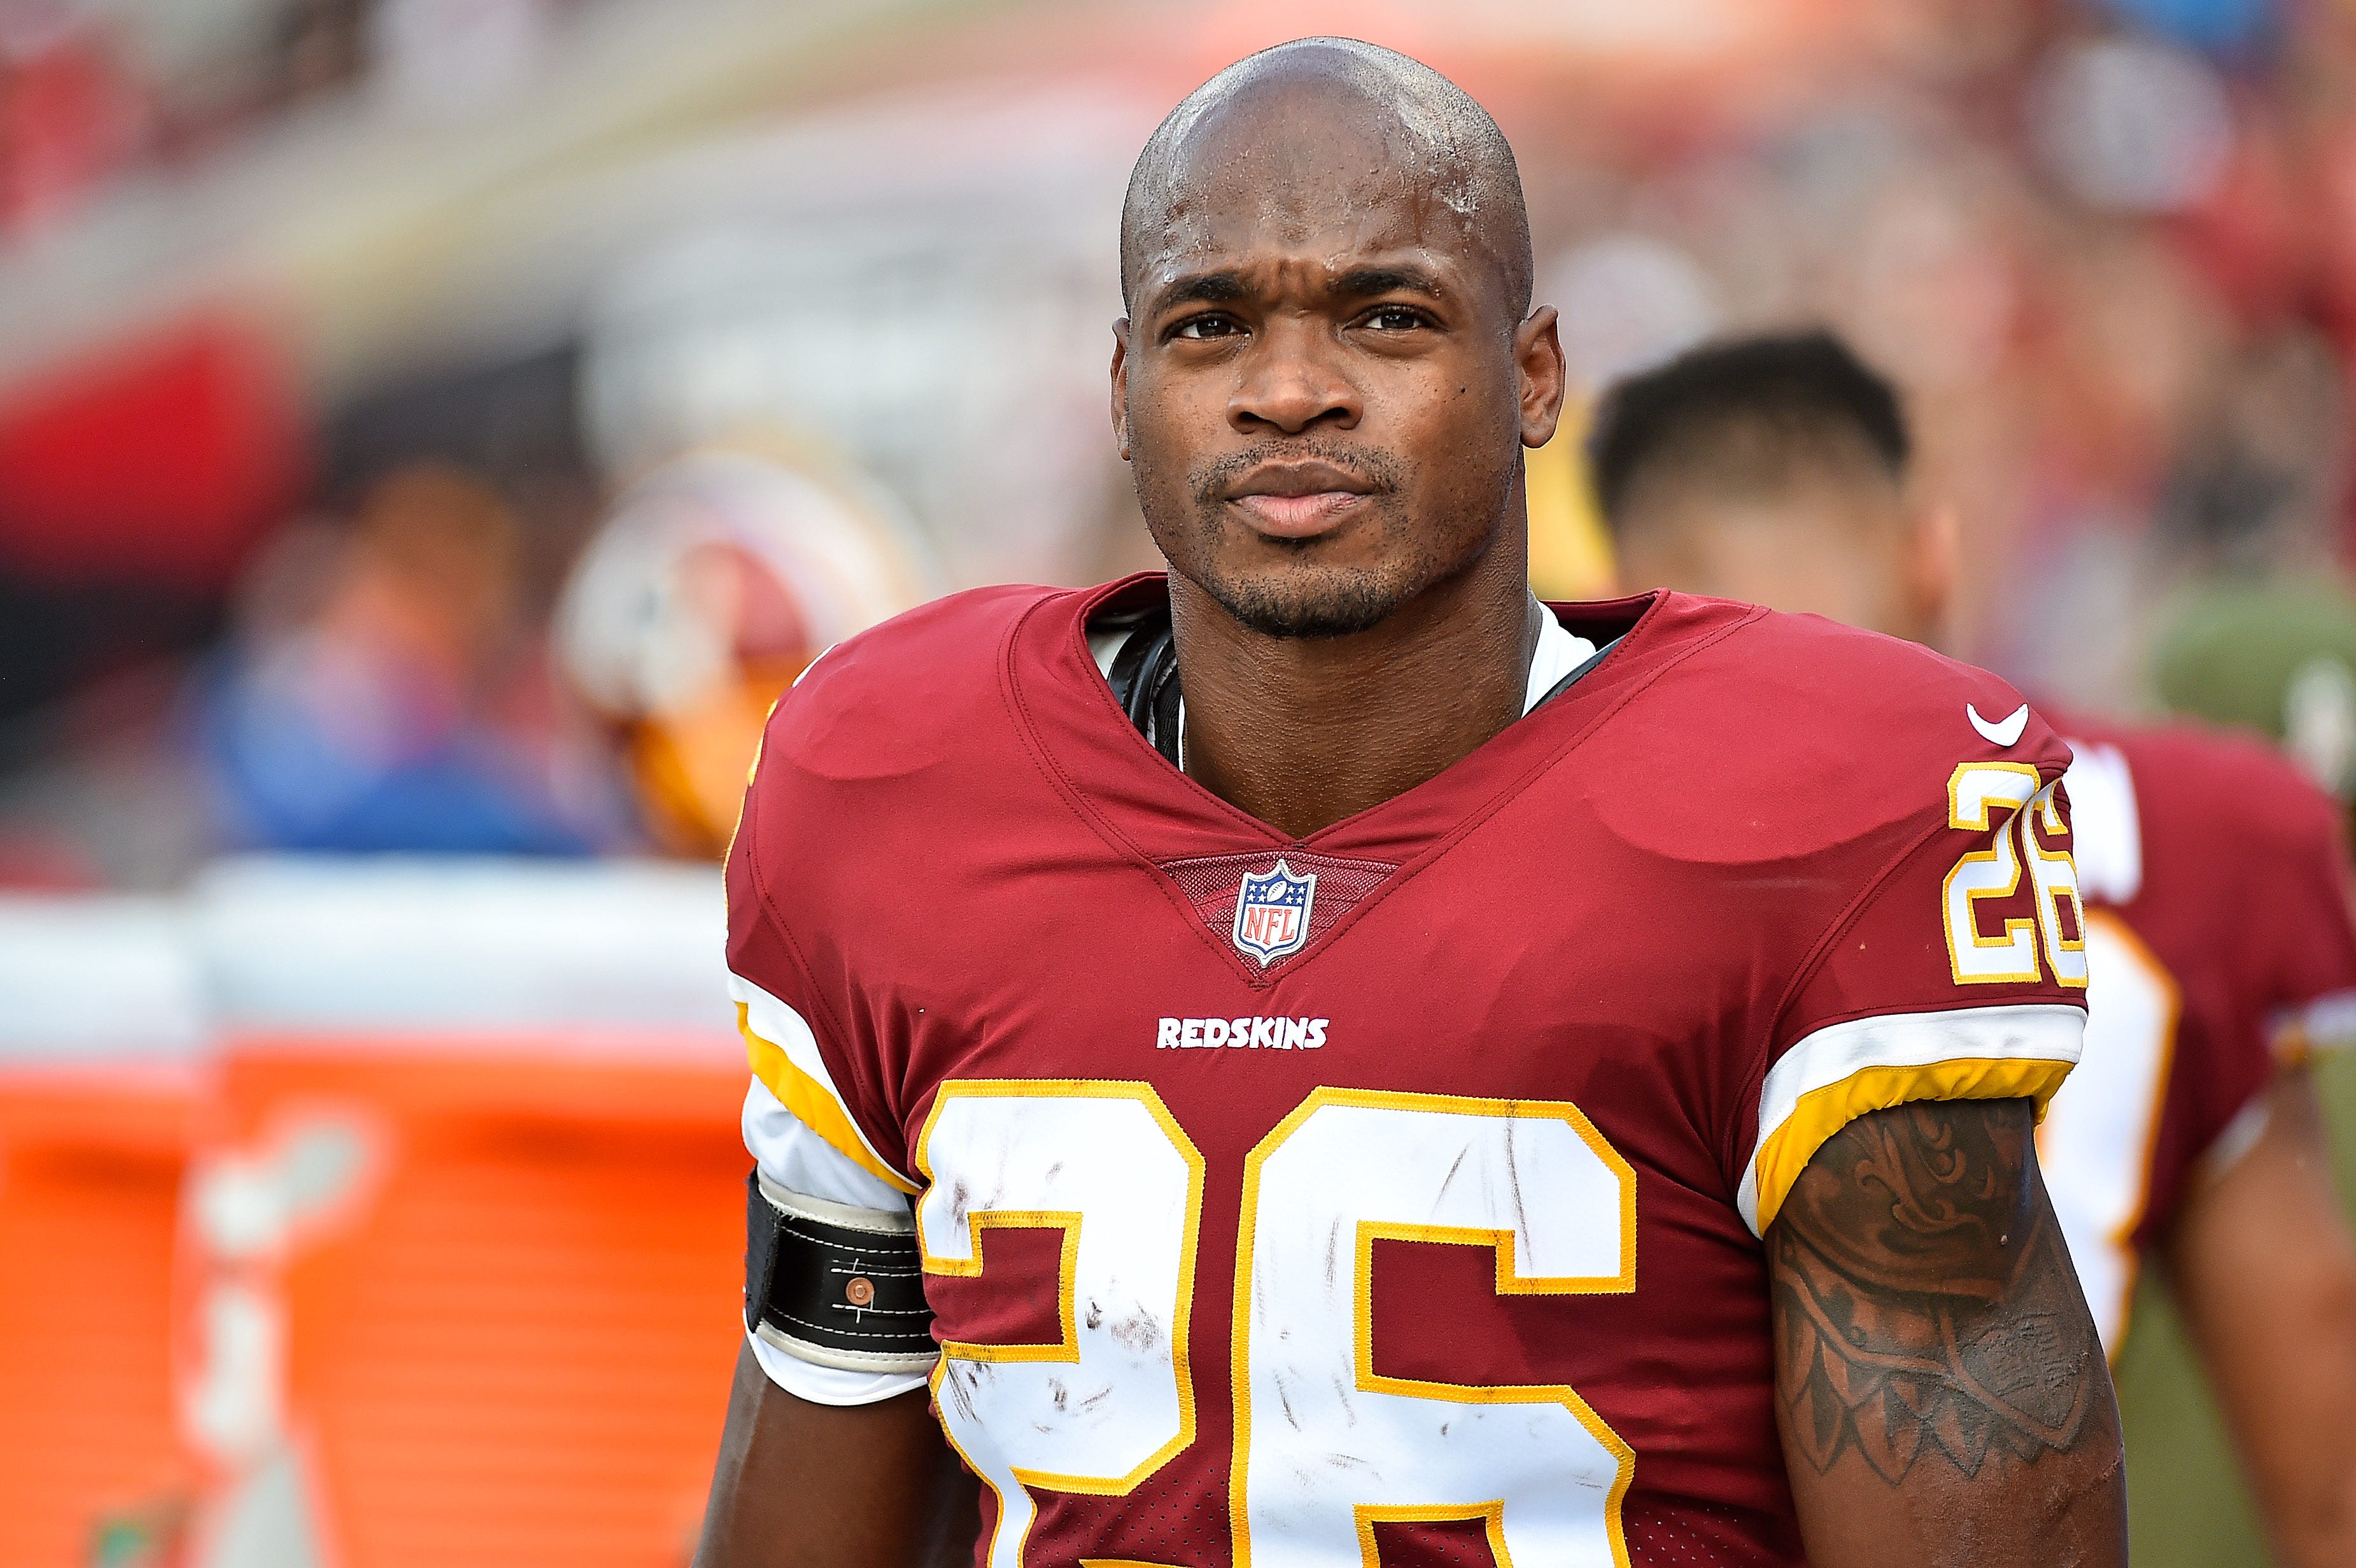 Redskins' Adrian Peterson admits he continues to spank his children